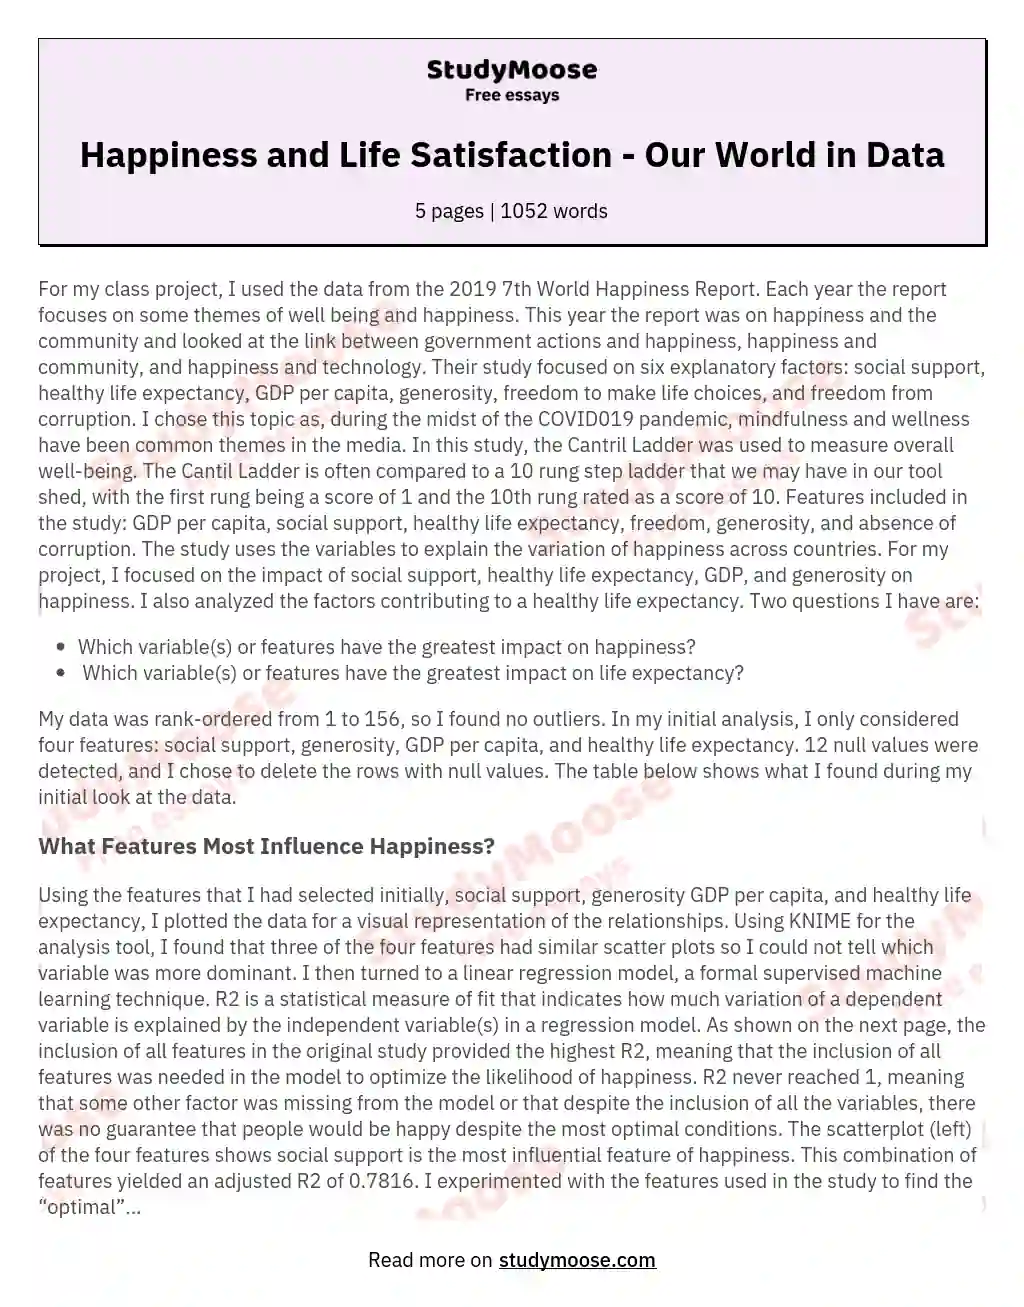 Happiness and Life Satisfaction - Our World in Data